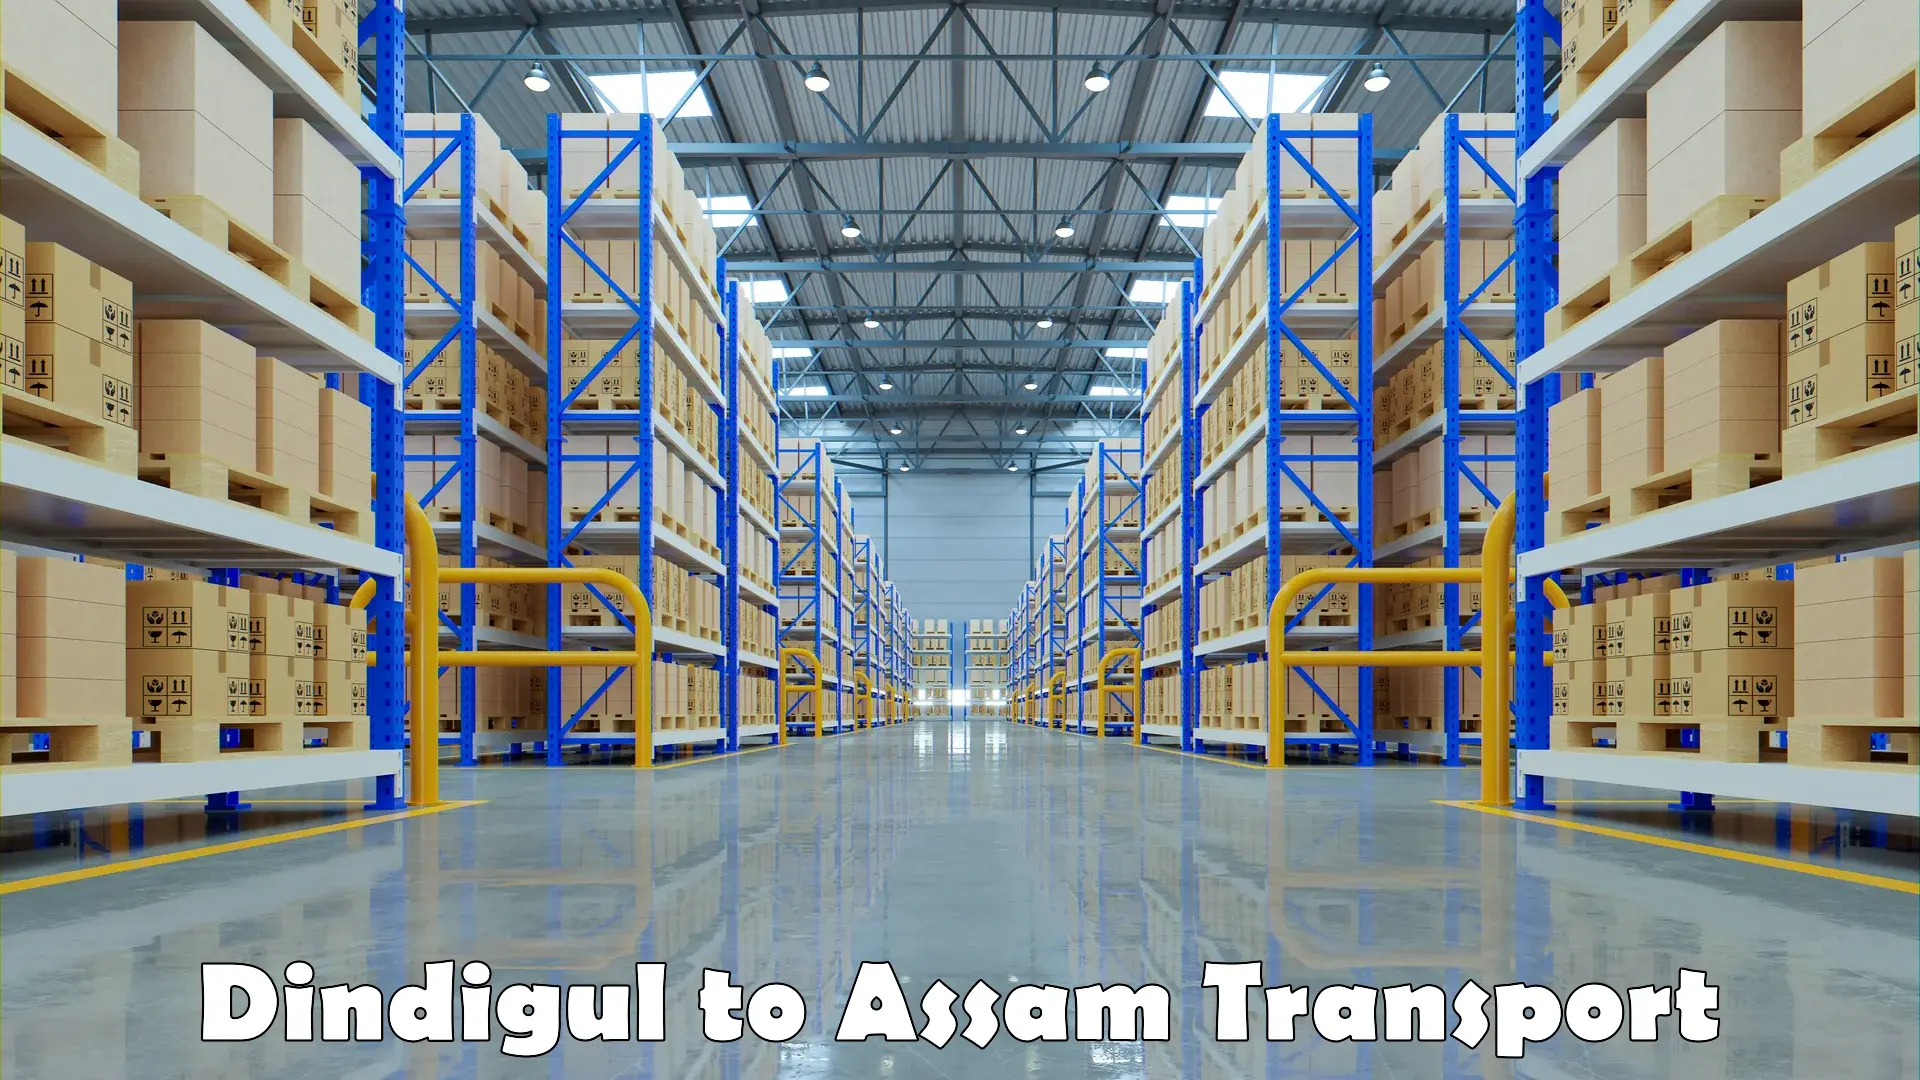 Transport in sharing Dindigul to Assam